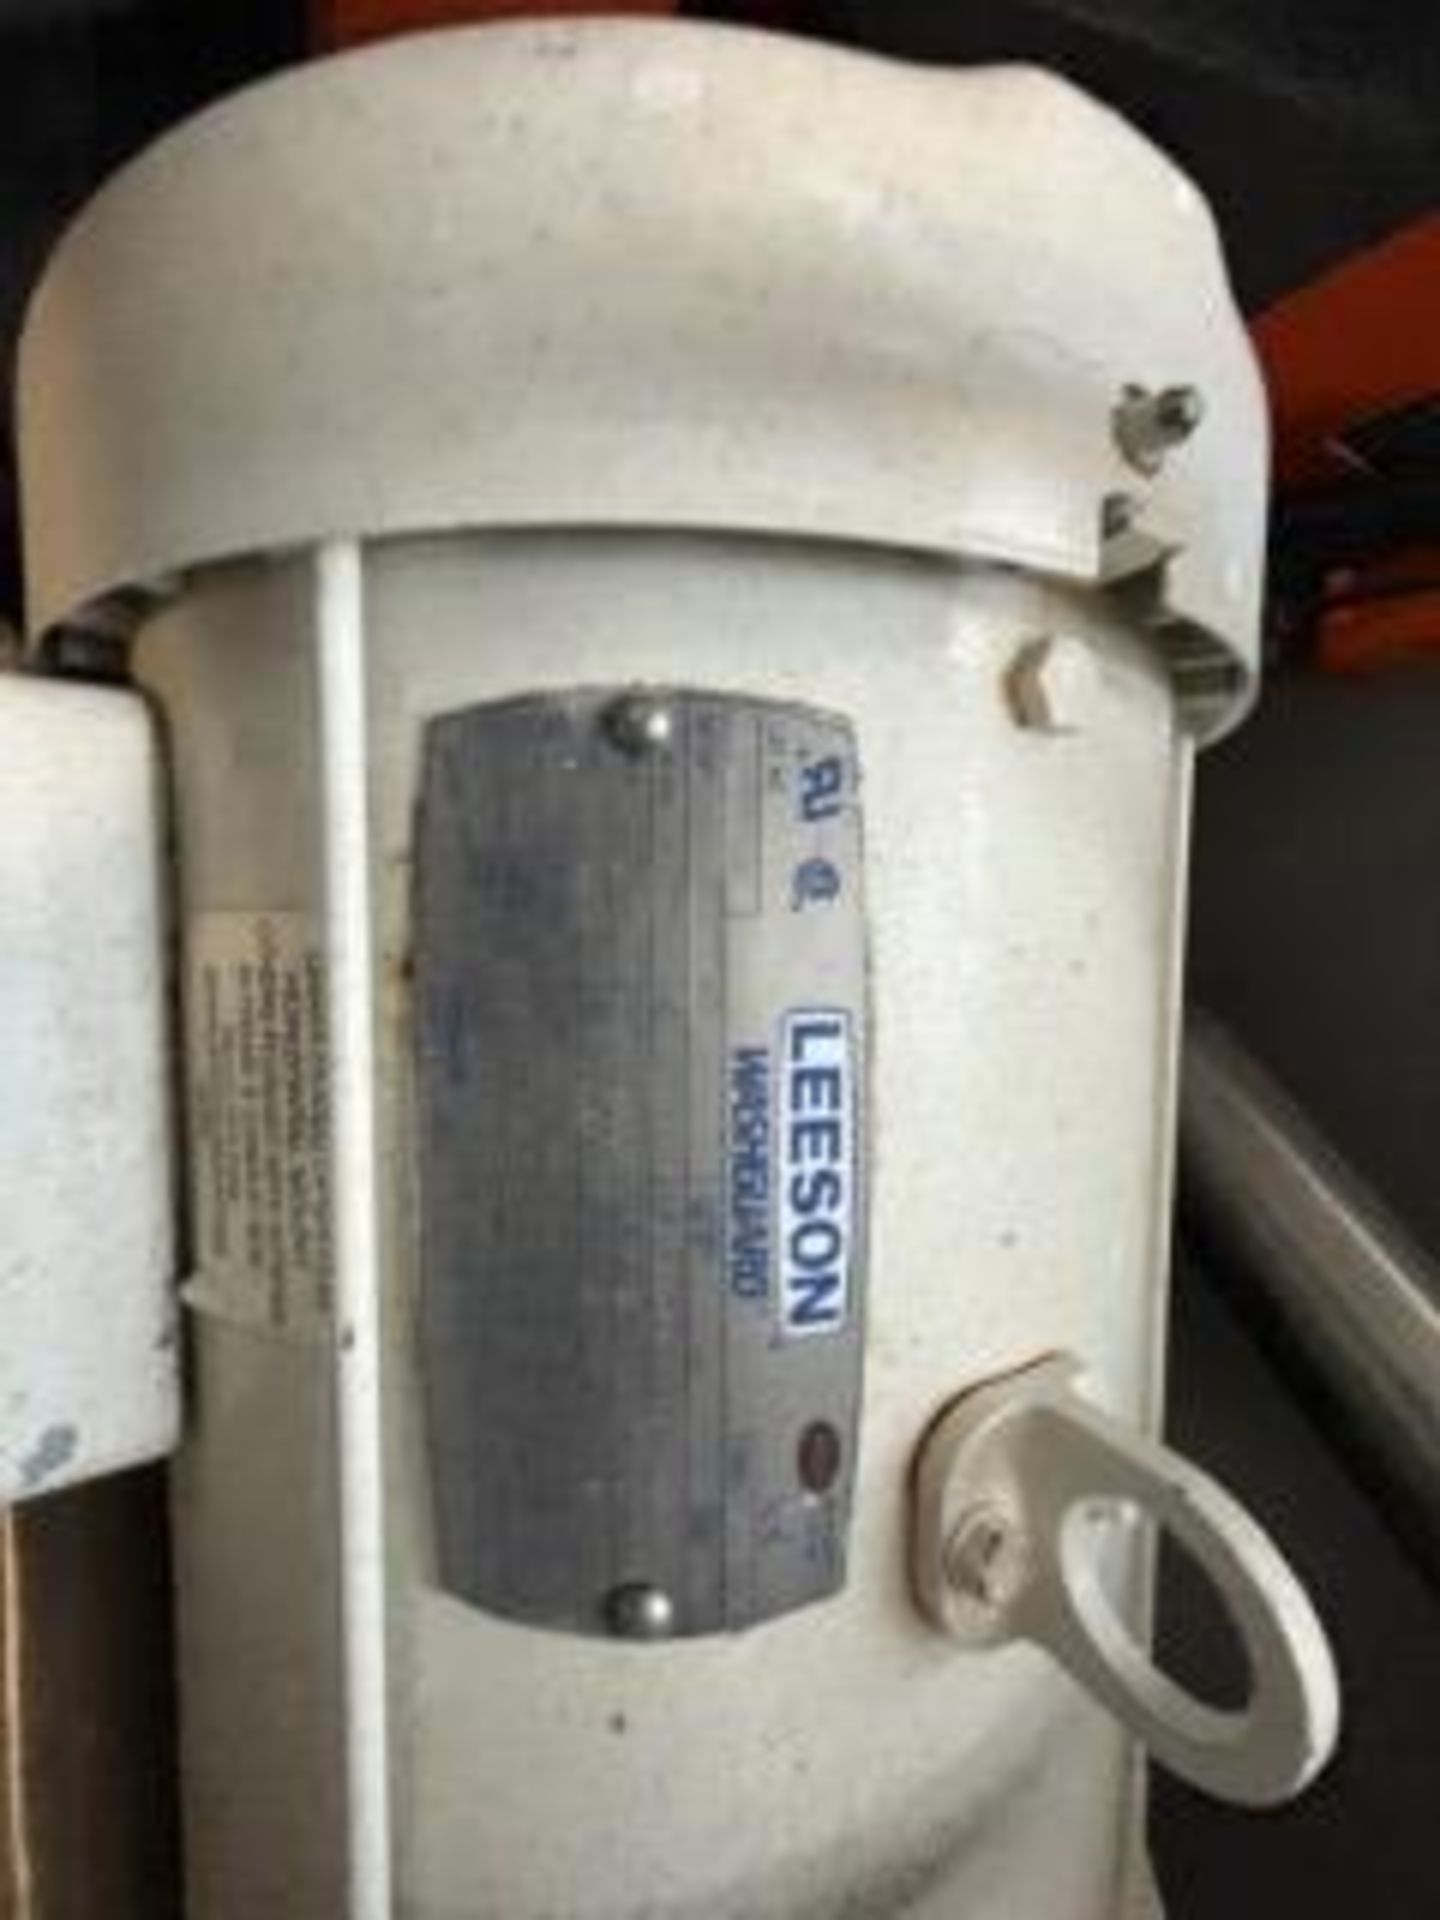 WALKER STAINLESS STEEL 50 GALLON LIQUI-MIXER WITH 10 HP LEESON MOTOR - Image 2 of 3